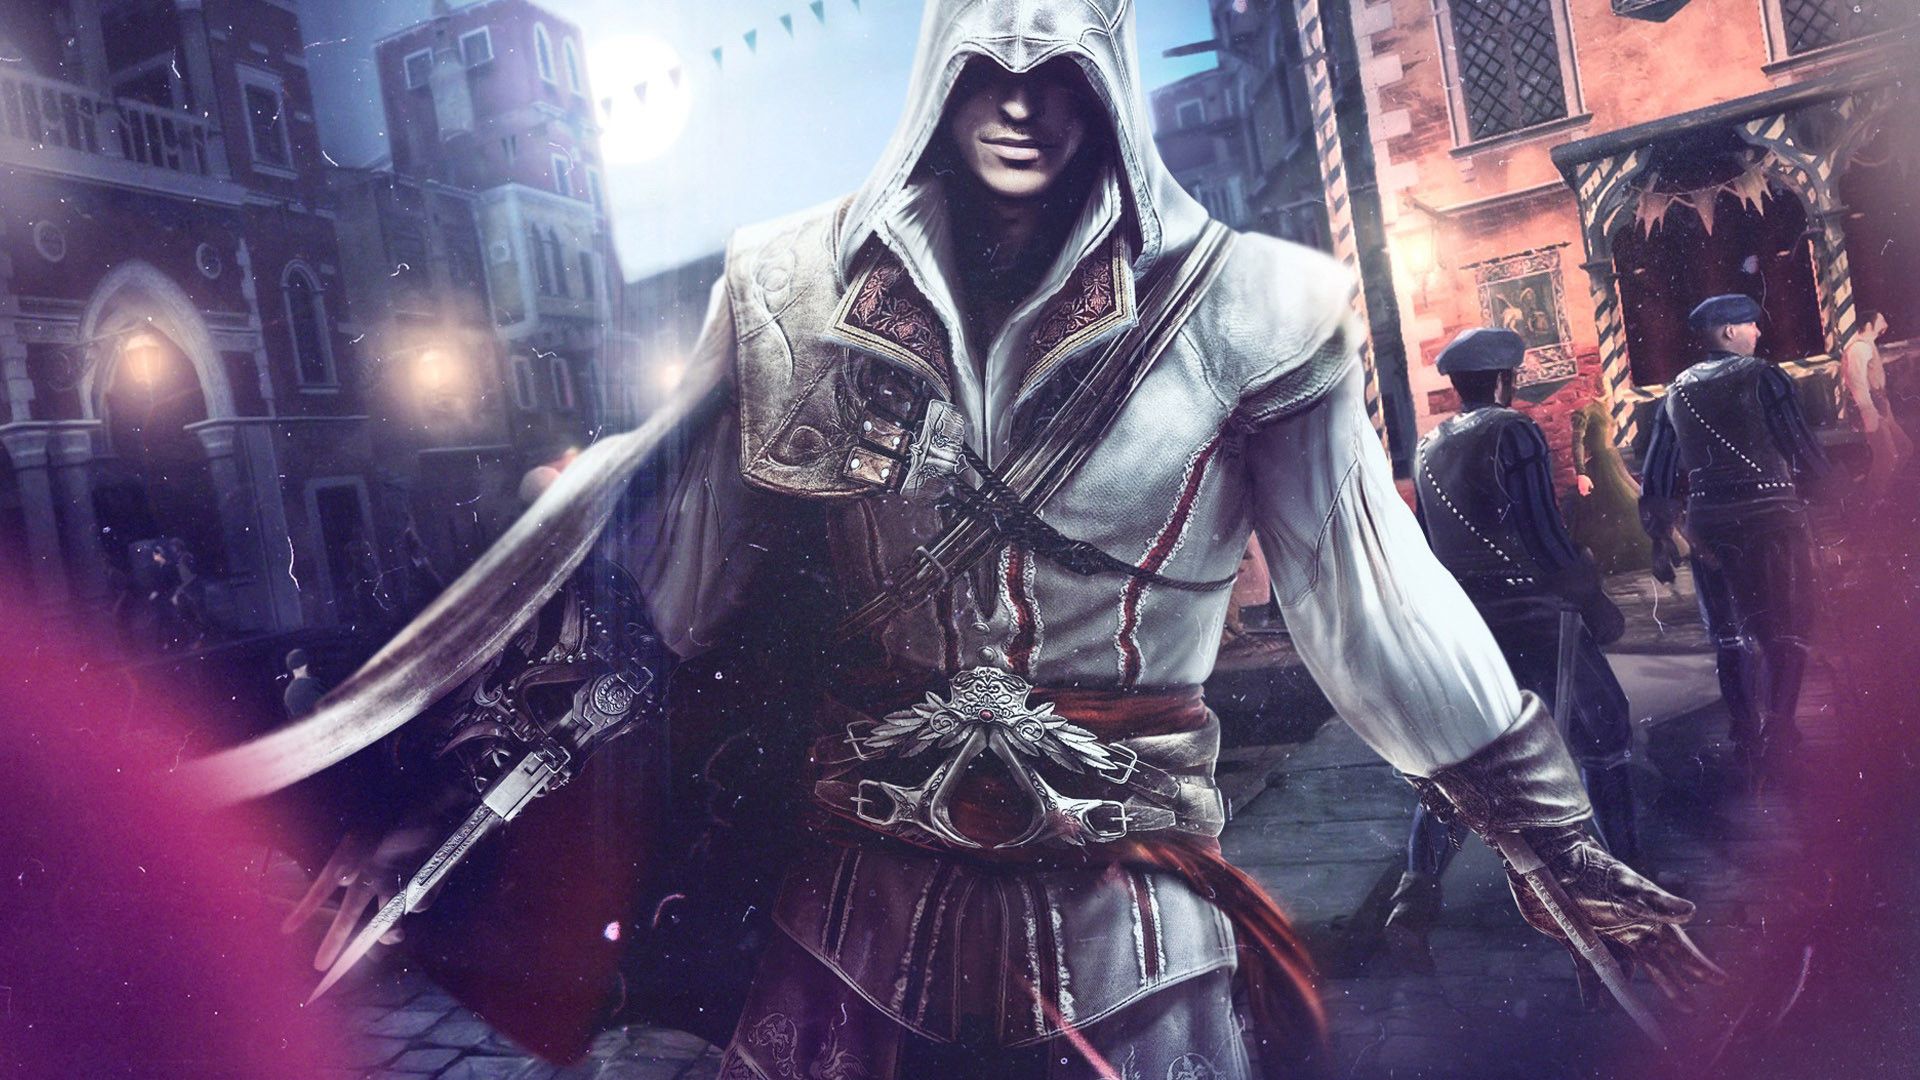 1920x1080 Assassin's Creed II Wallpapers (41 Wallpapers)